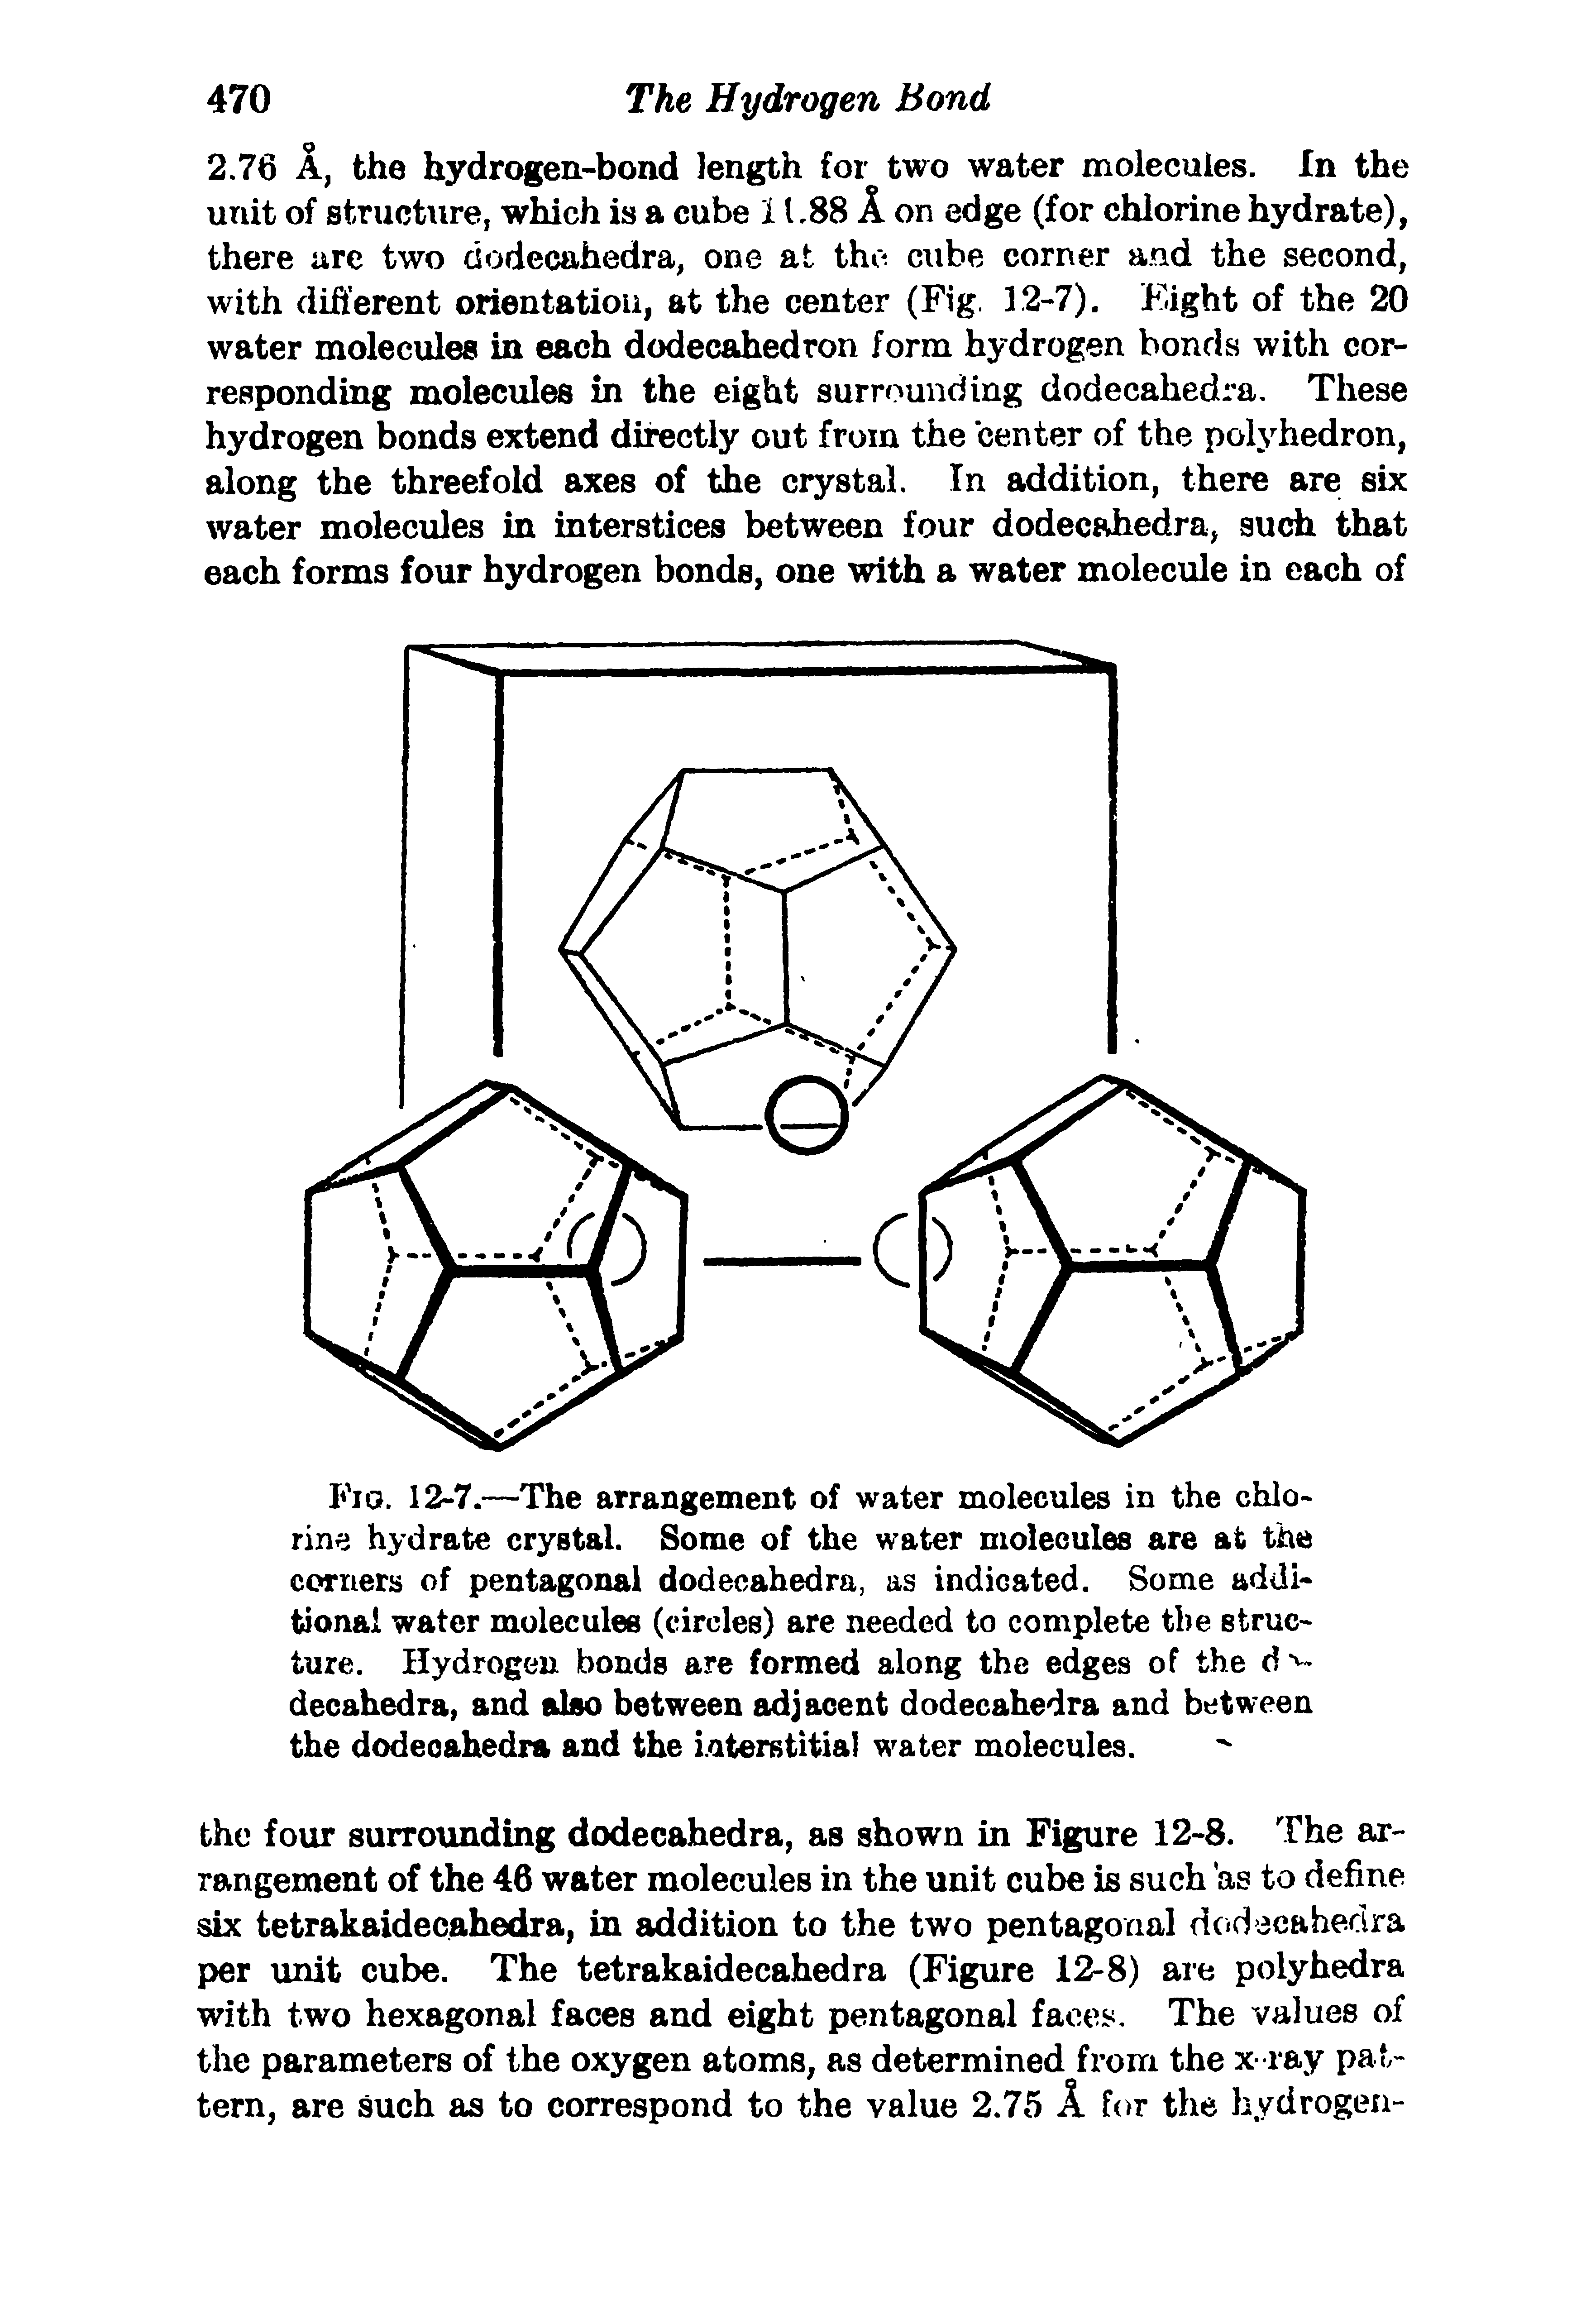 Fig. 12-7.—The arrangement of water molecules in the chlorine hydrate crystal. Some of the water molecules are at the corners of pentagonal dodecahedra, as indicated. Some additional water molecules (circles) are needed to complete the structure. Hydrogen bonds are formed along the edges of the d decahedra, and also between adjacent dodecahedra and between the dodecahedra and the interstitial water molecules.